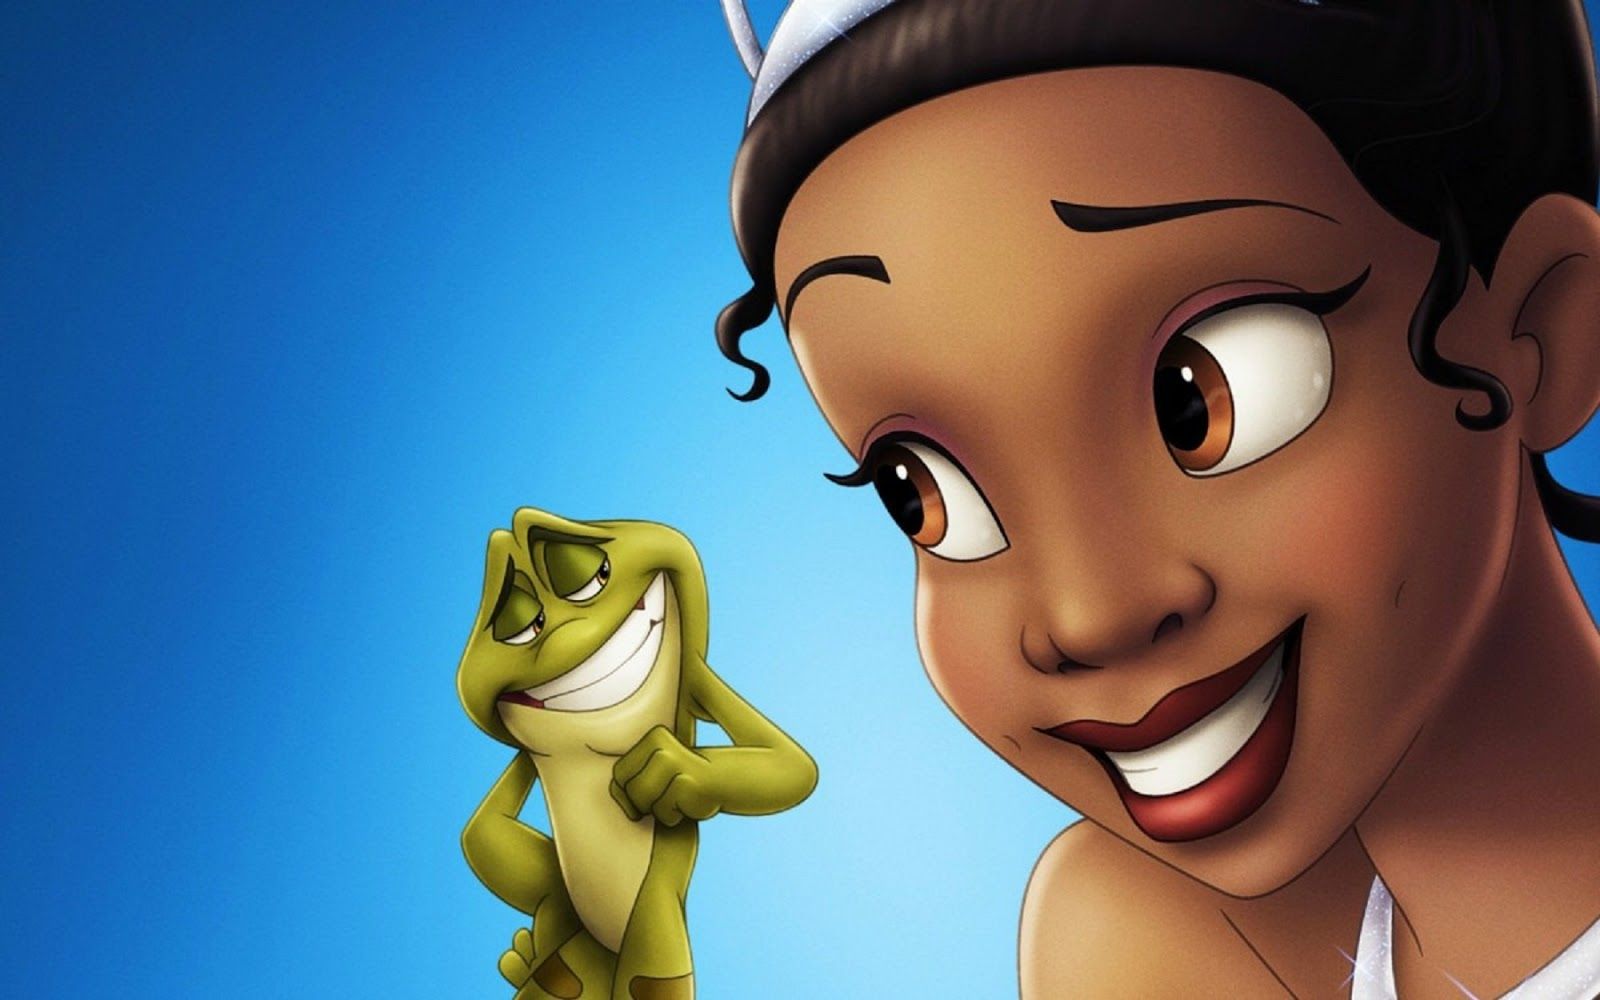 Disney HD Wallpapers: The Princess and the Frog HD Wallpapers